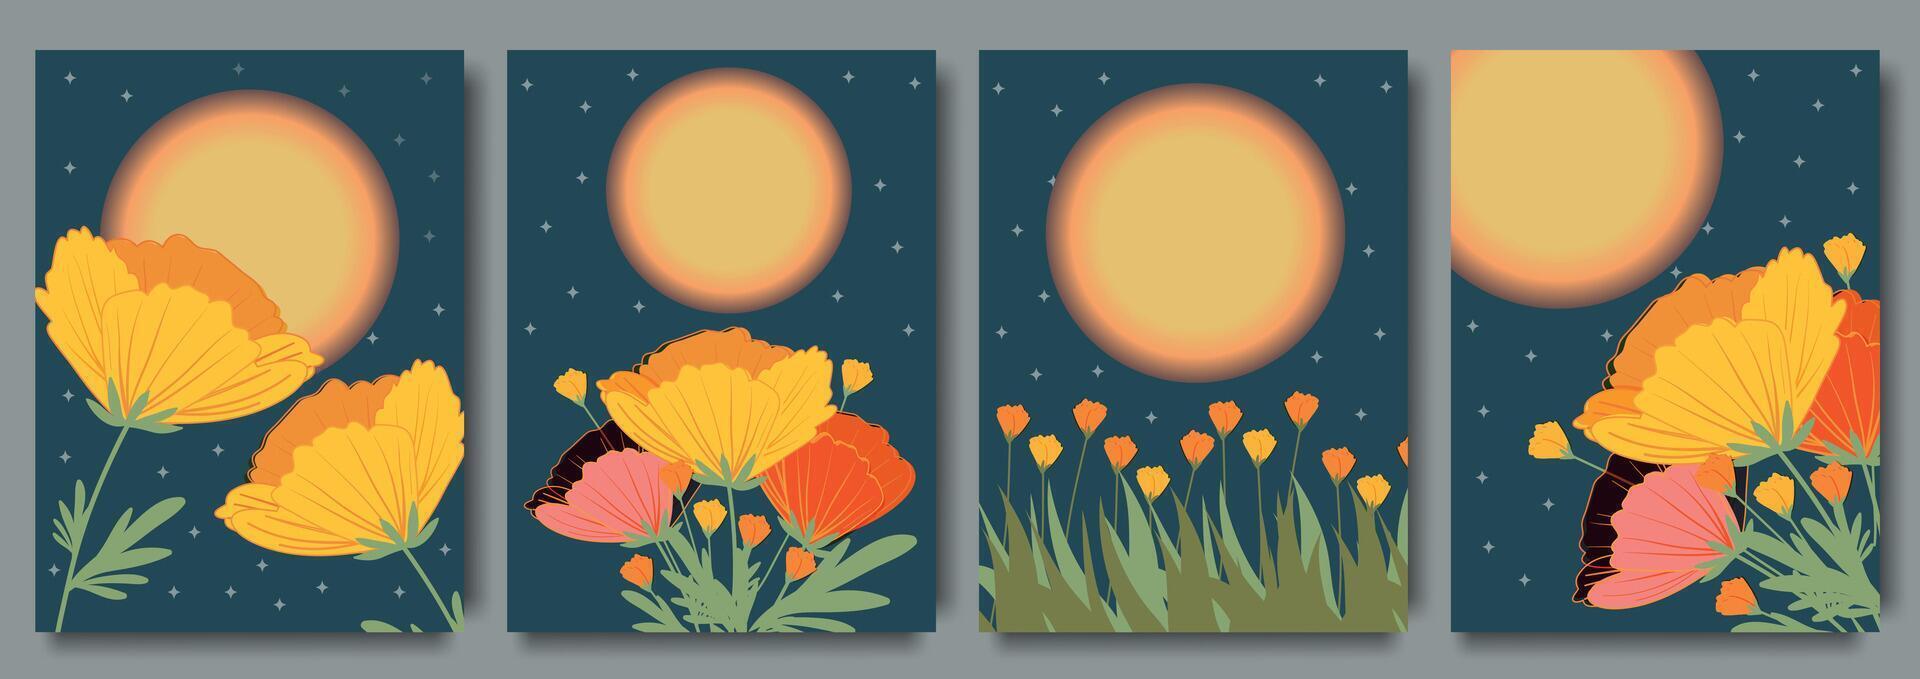 Set of trendy summer posters with flowers. Summer set of the cutest cards or posters for the summer holiday with wildflowers. Hand drawn Floral art templates. summer season or natural concept vector